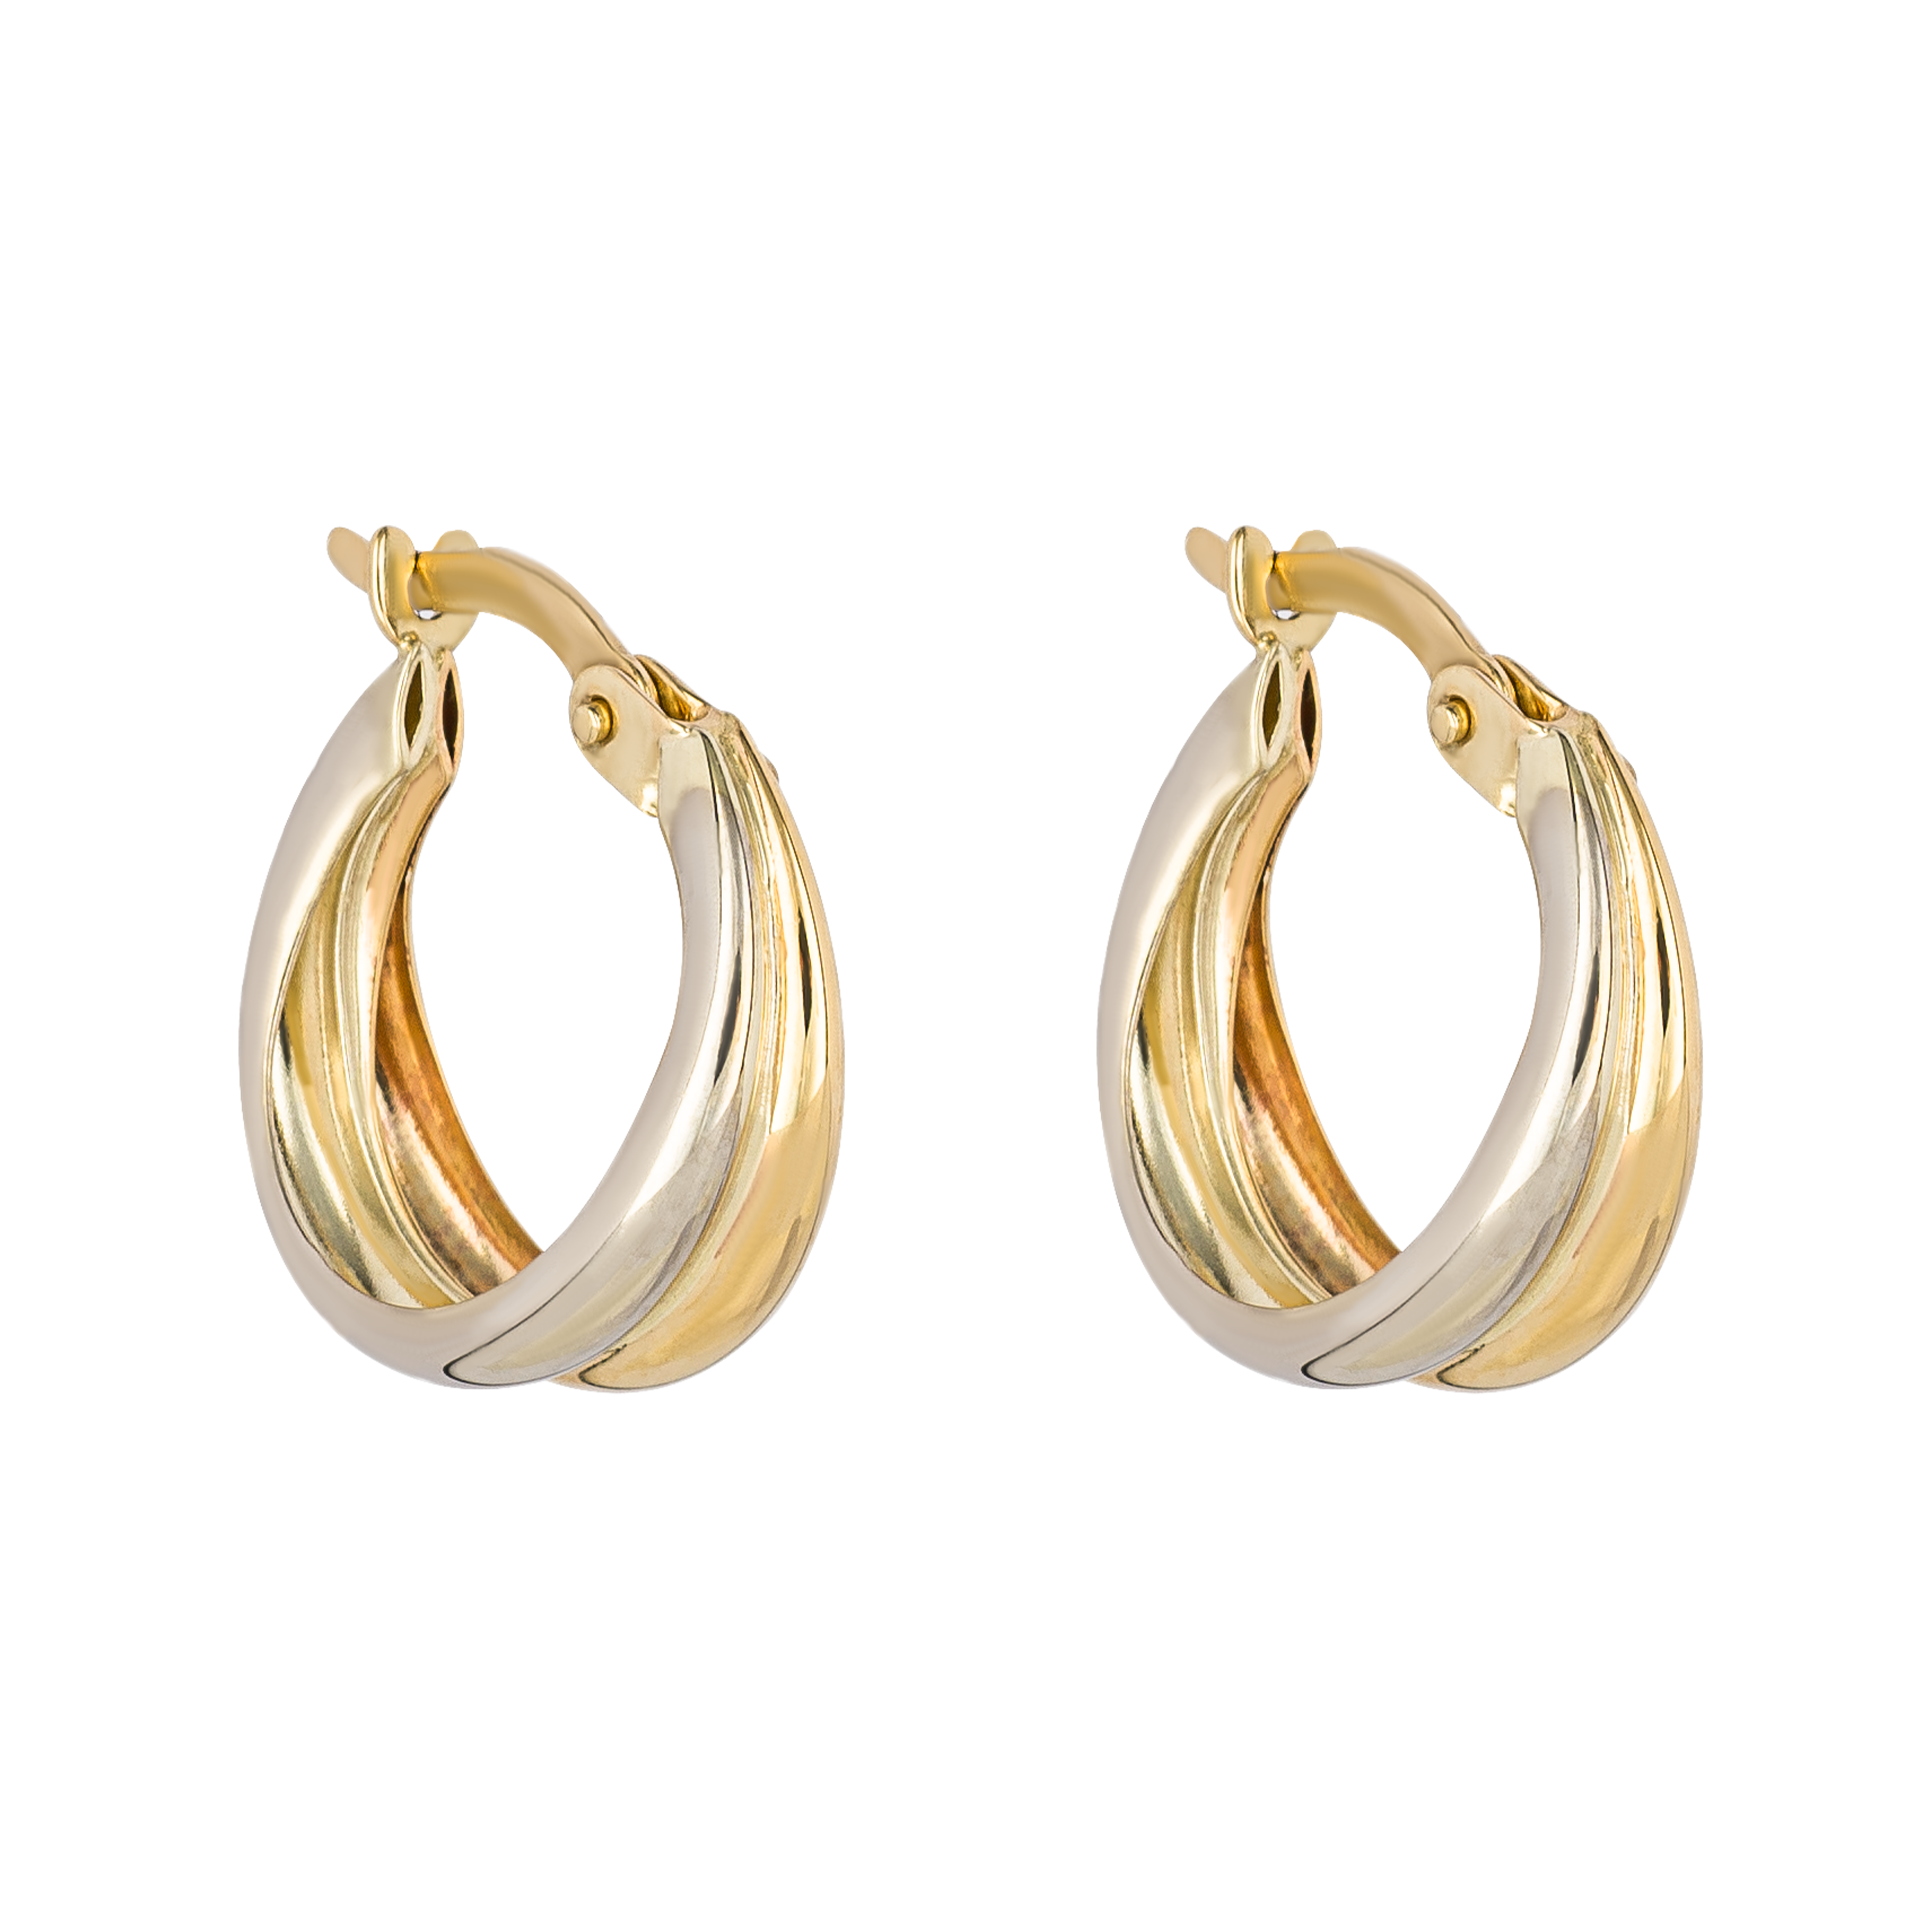 9ct yellow and white gold double hoop earrings